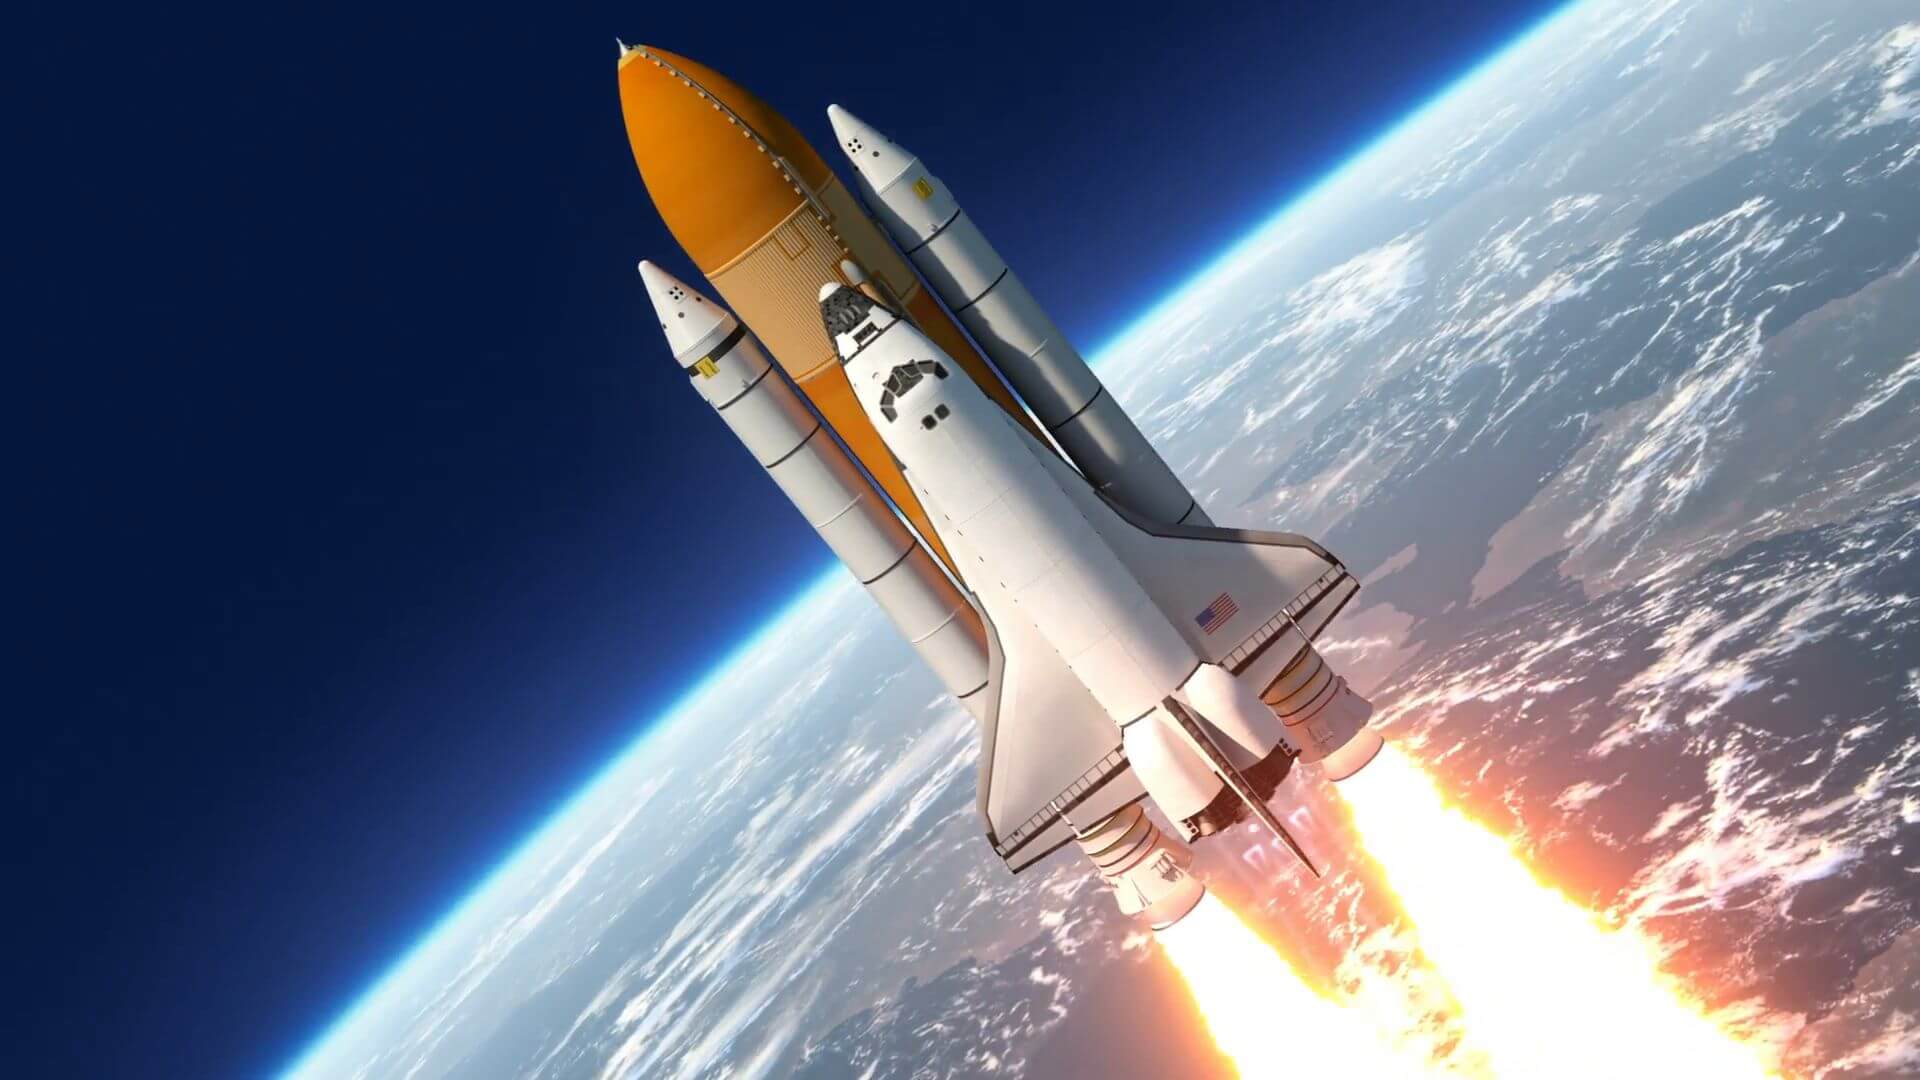 space-shuttle-launch-3d-animation_snm6vdbl__F0005.jpg